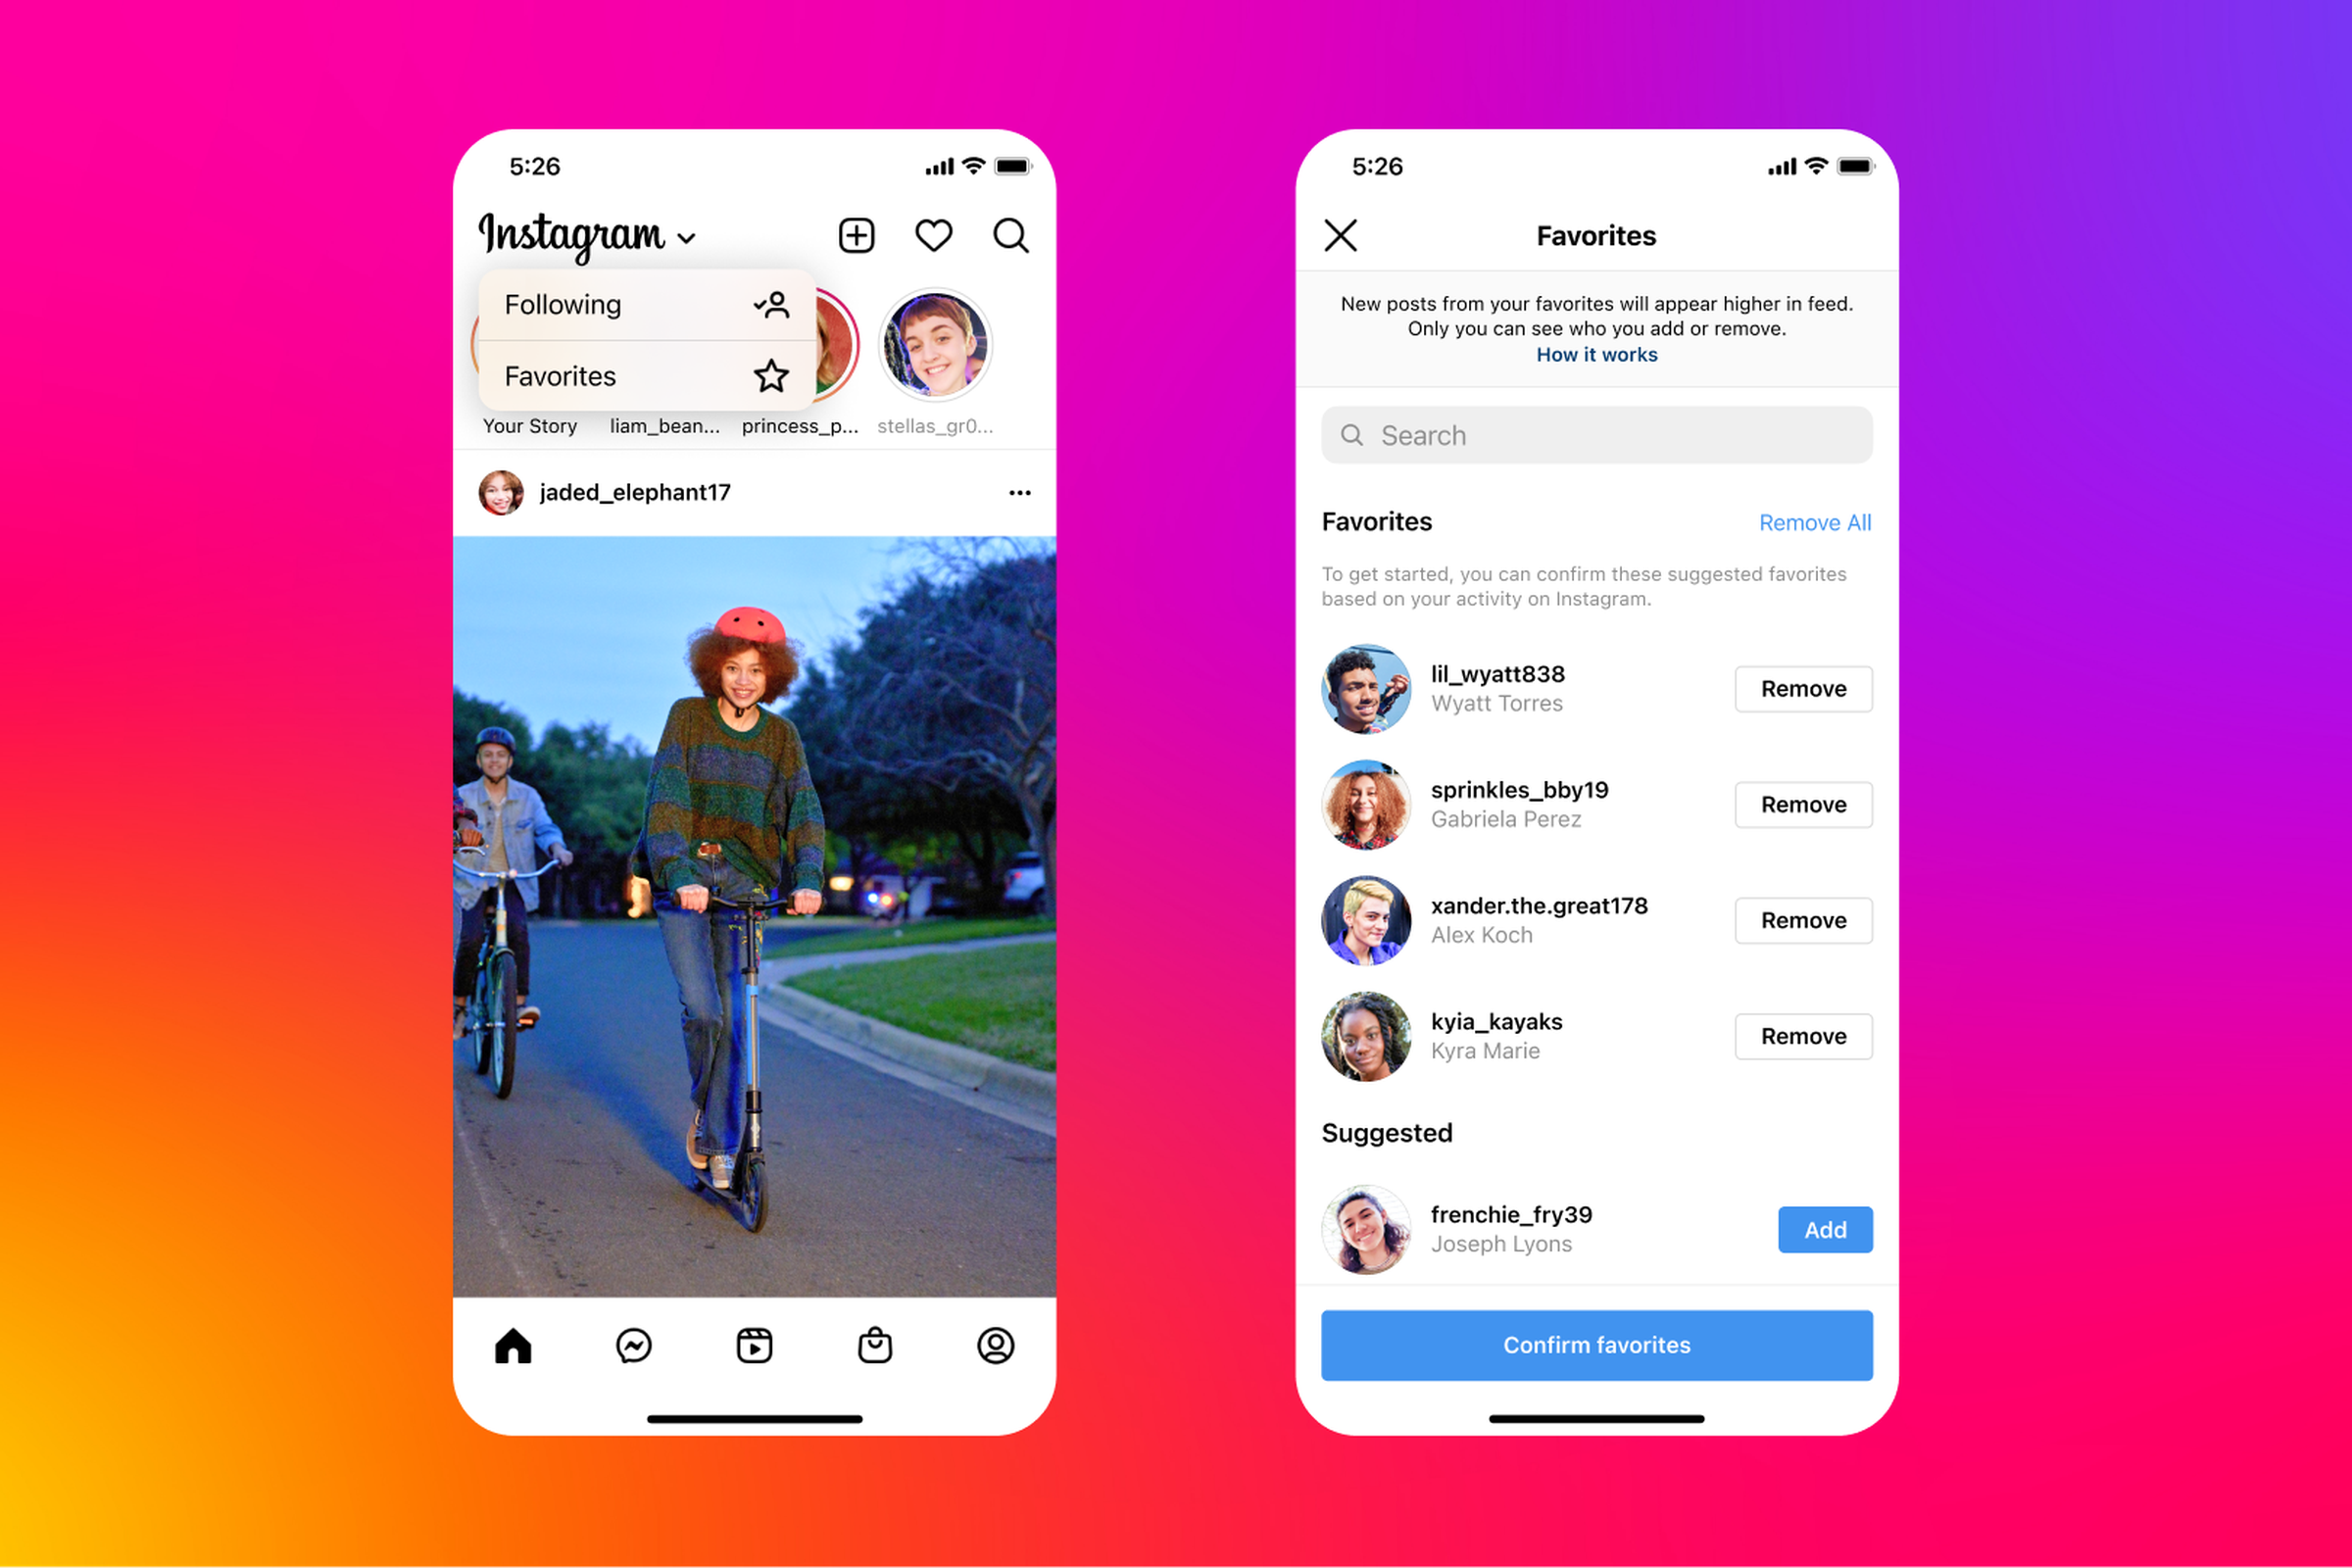 Instagram says it’s giving users more control over their feeds.